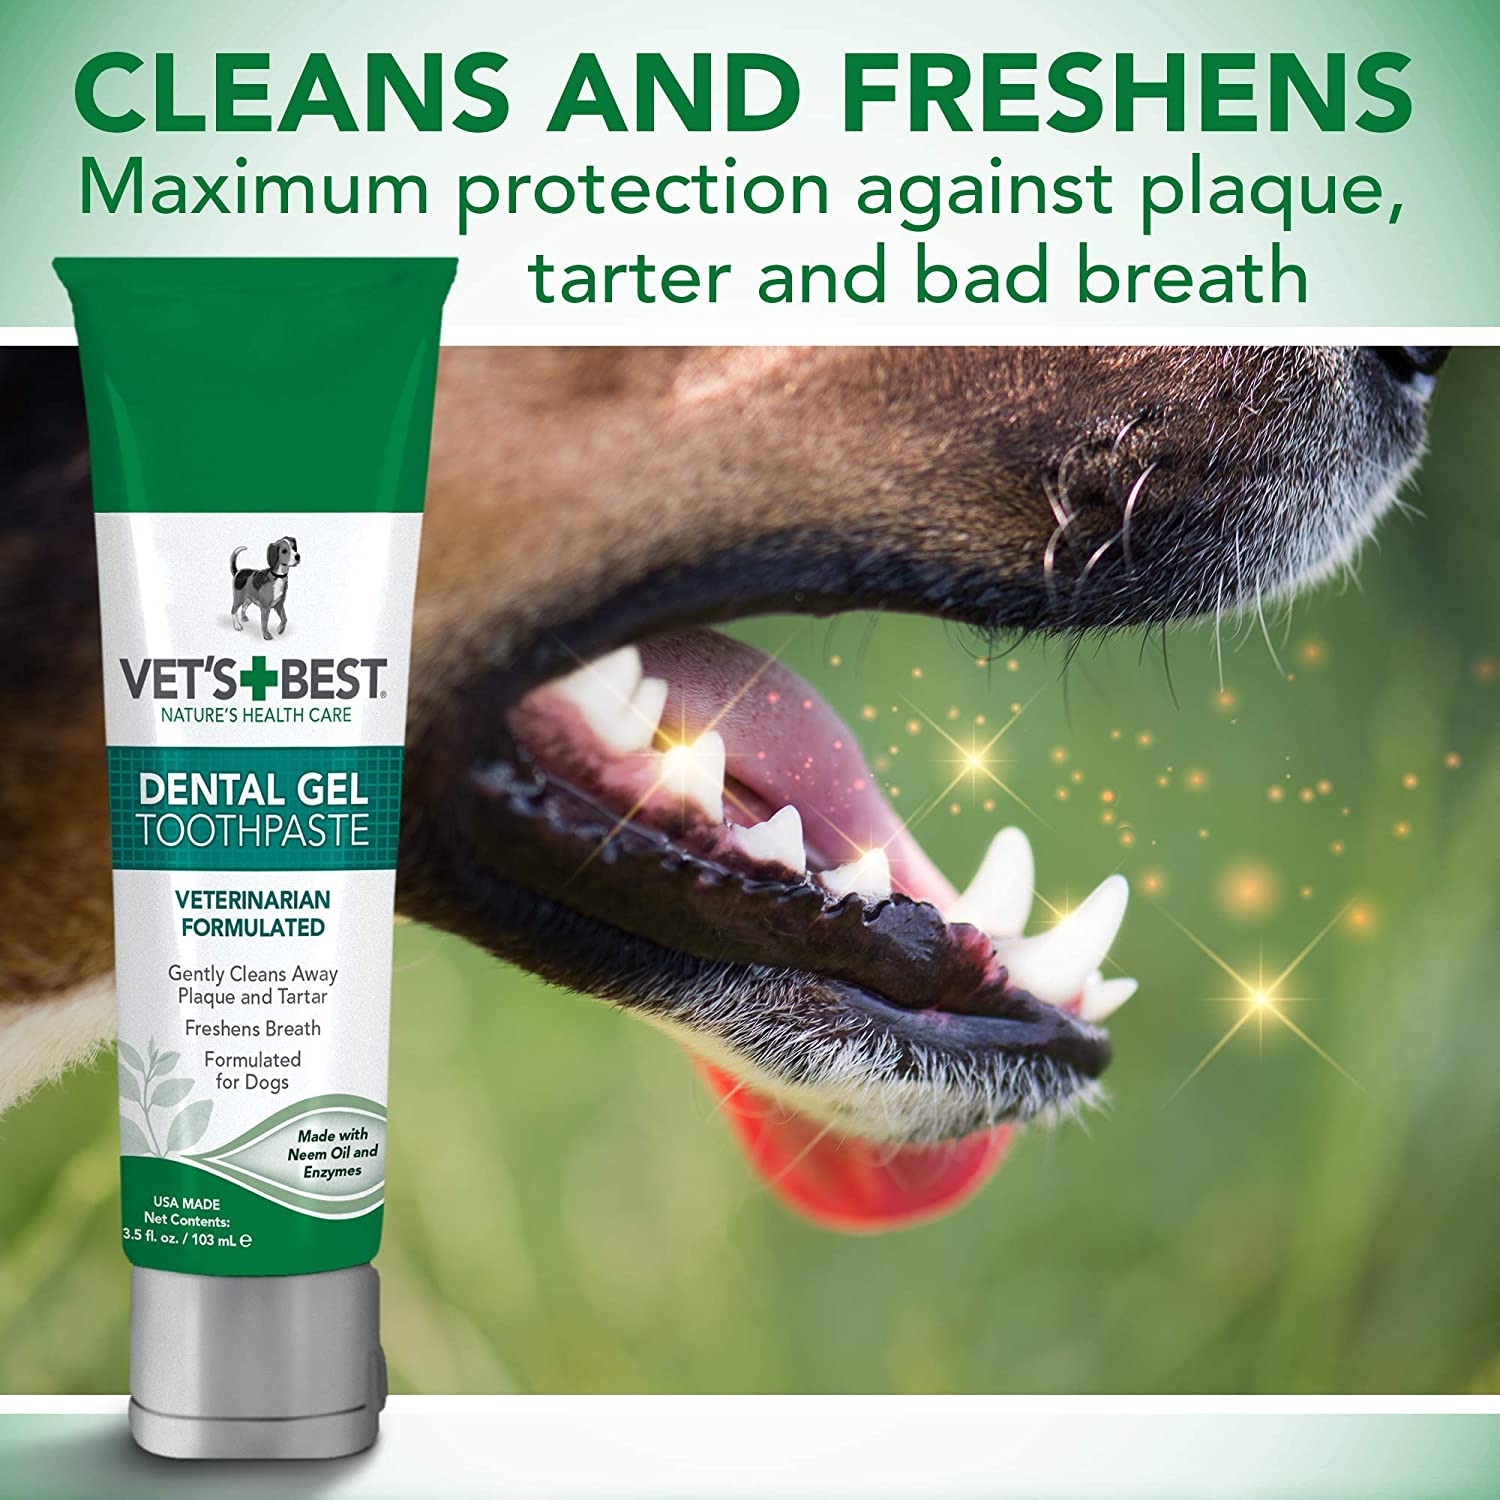 Vet’s Best Enzymatic Dog Toothpaste | Teeth Cleaning and Fresh Breath Dental Care Gel | Vet Formulated